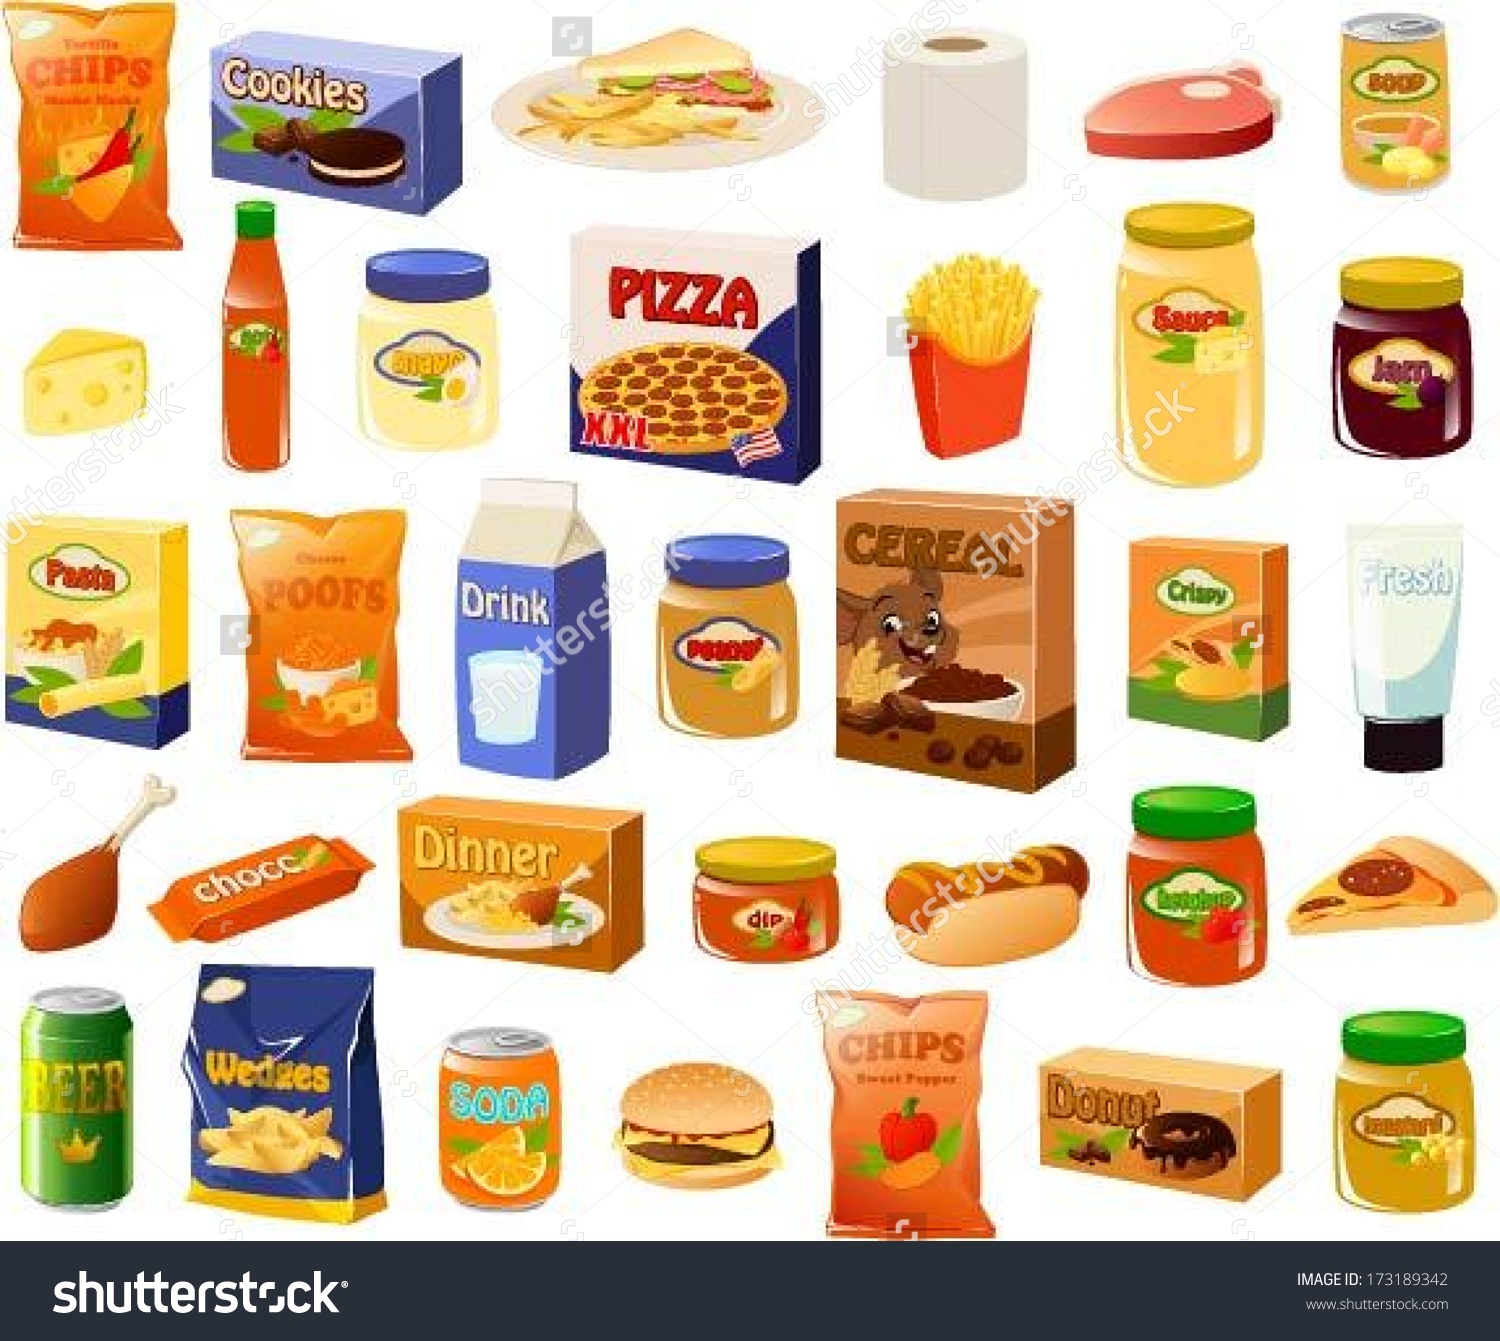 Clipart grocery items 